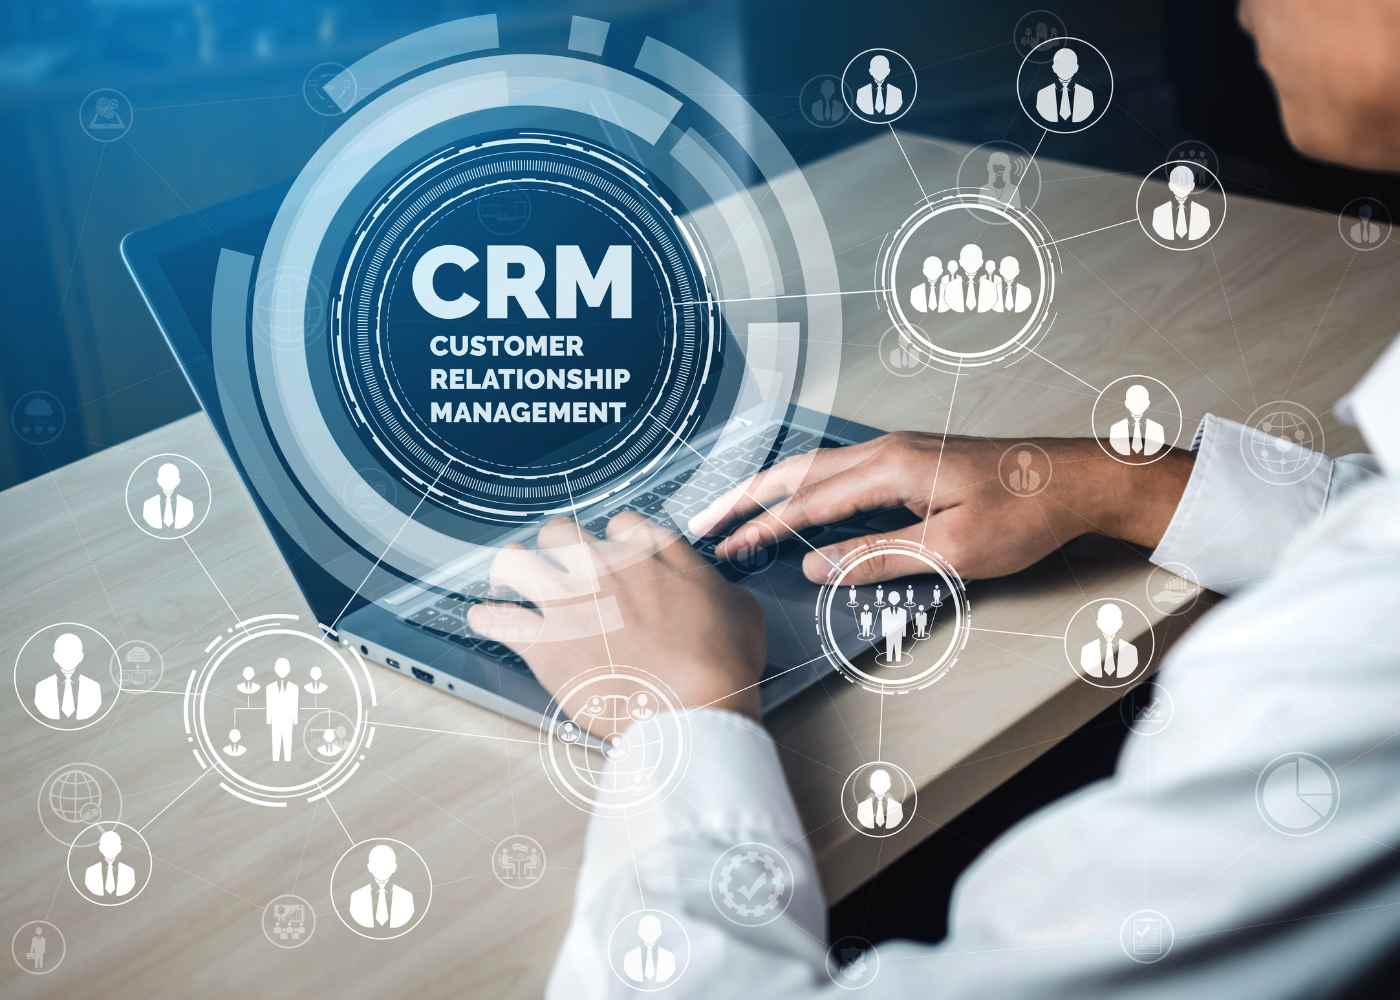 Maximize Customer Engagement: Web Apps for CRM and Customer Support